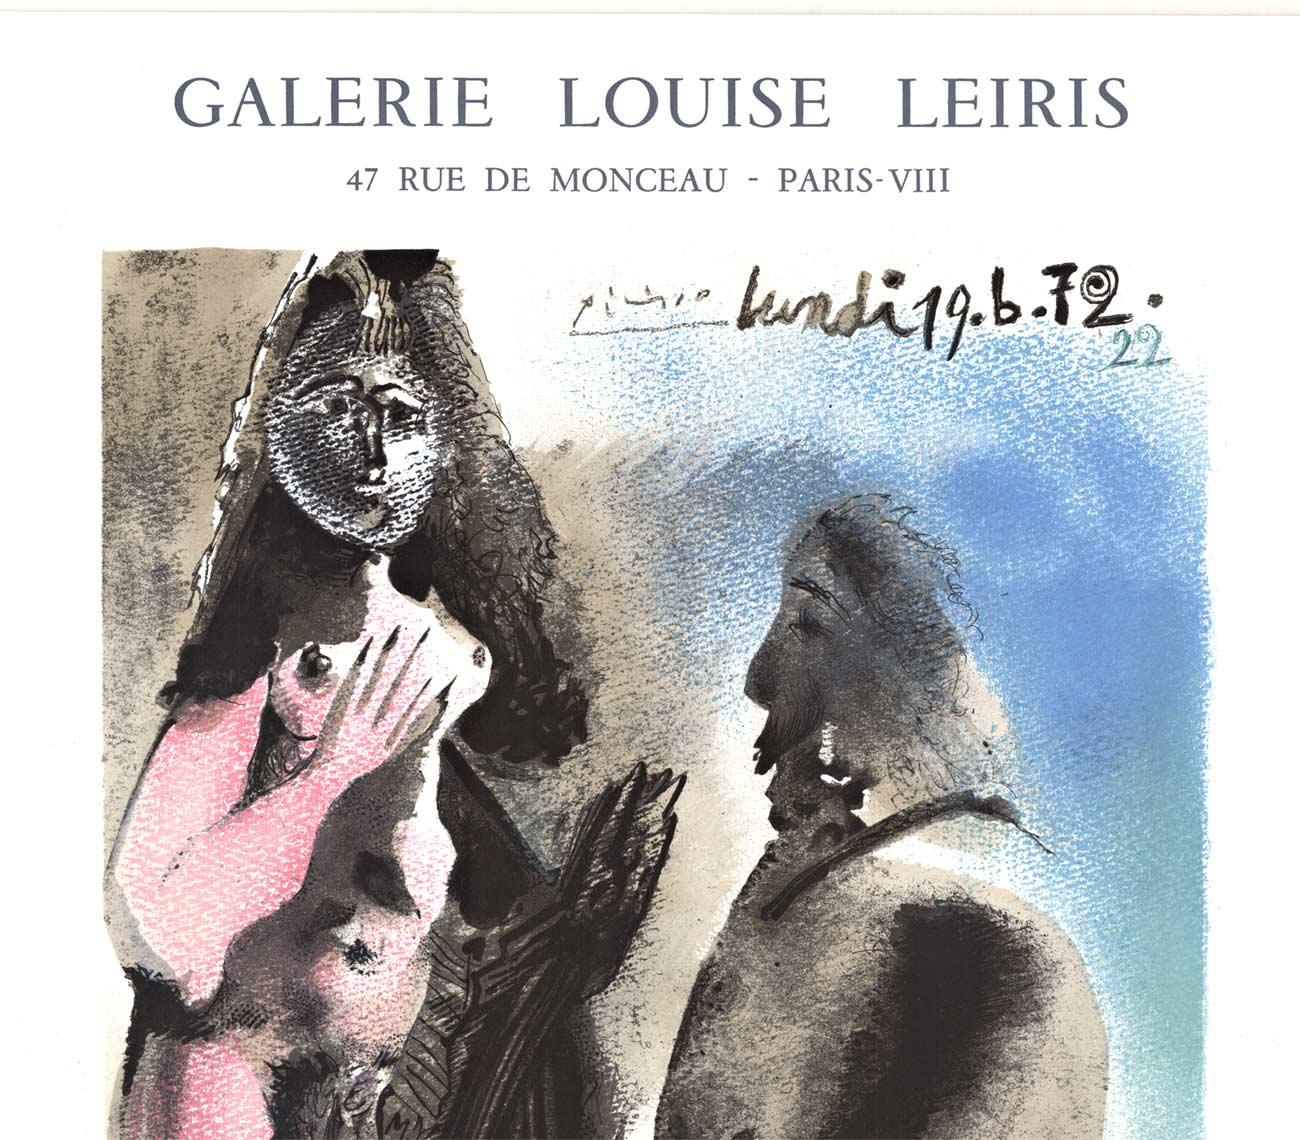 PICASSO, Galerie Louise Leiris Exhibition vintage poster - Print by Pablo Picasso